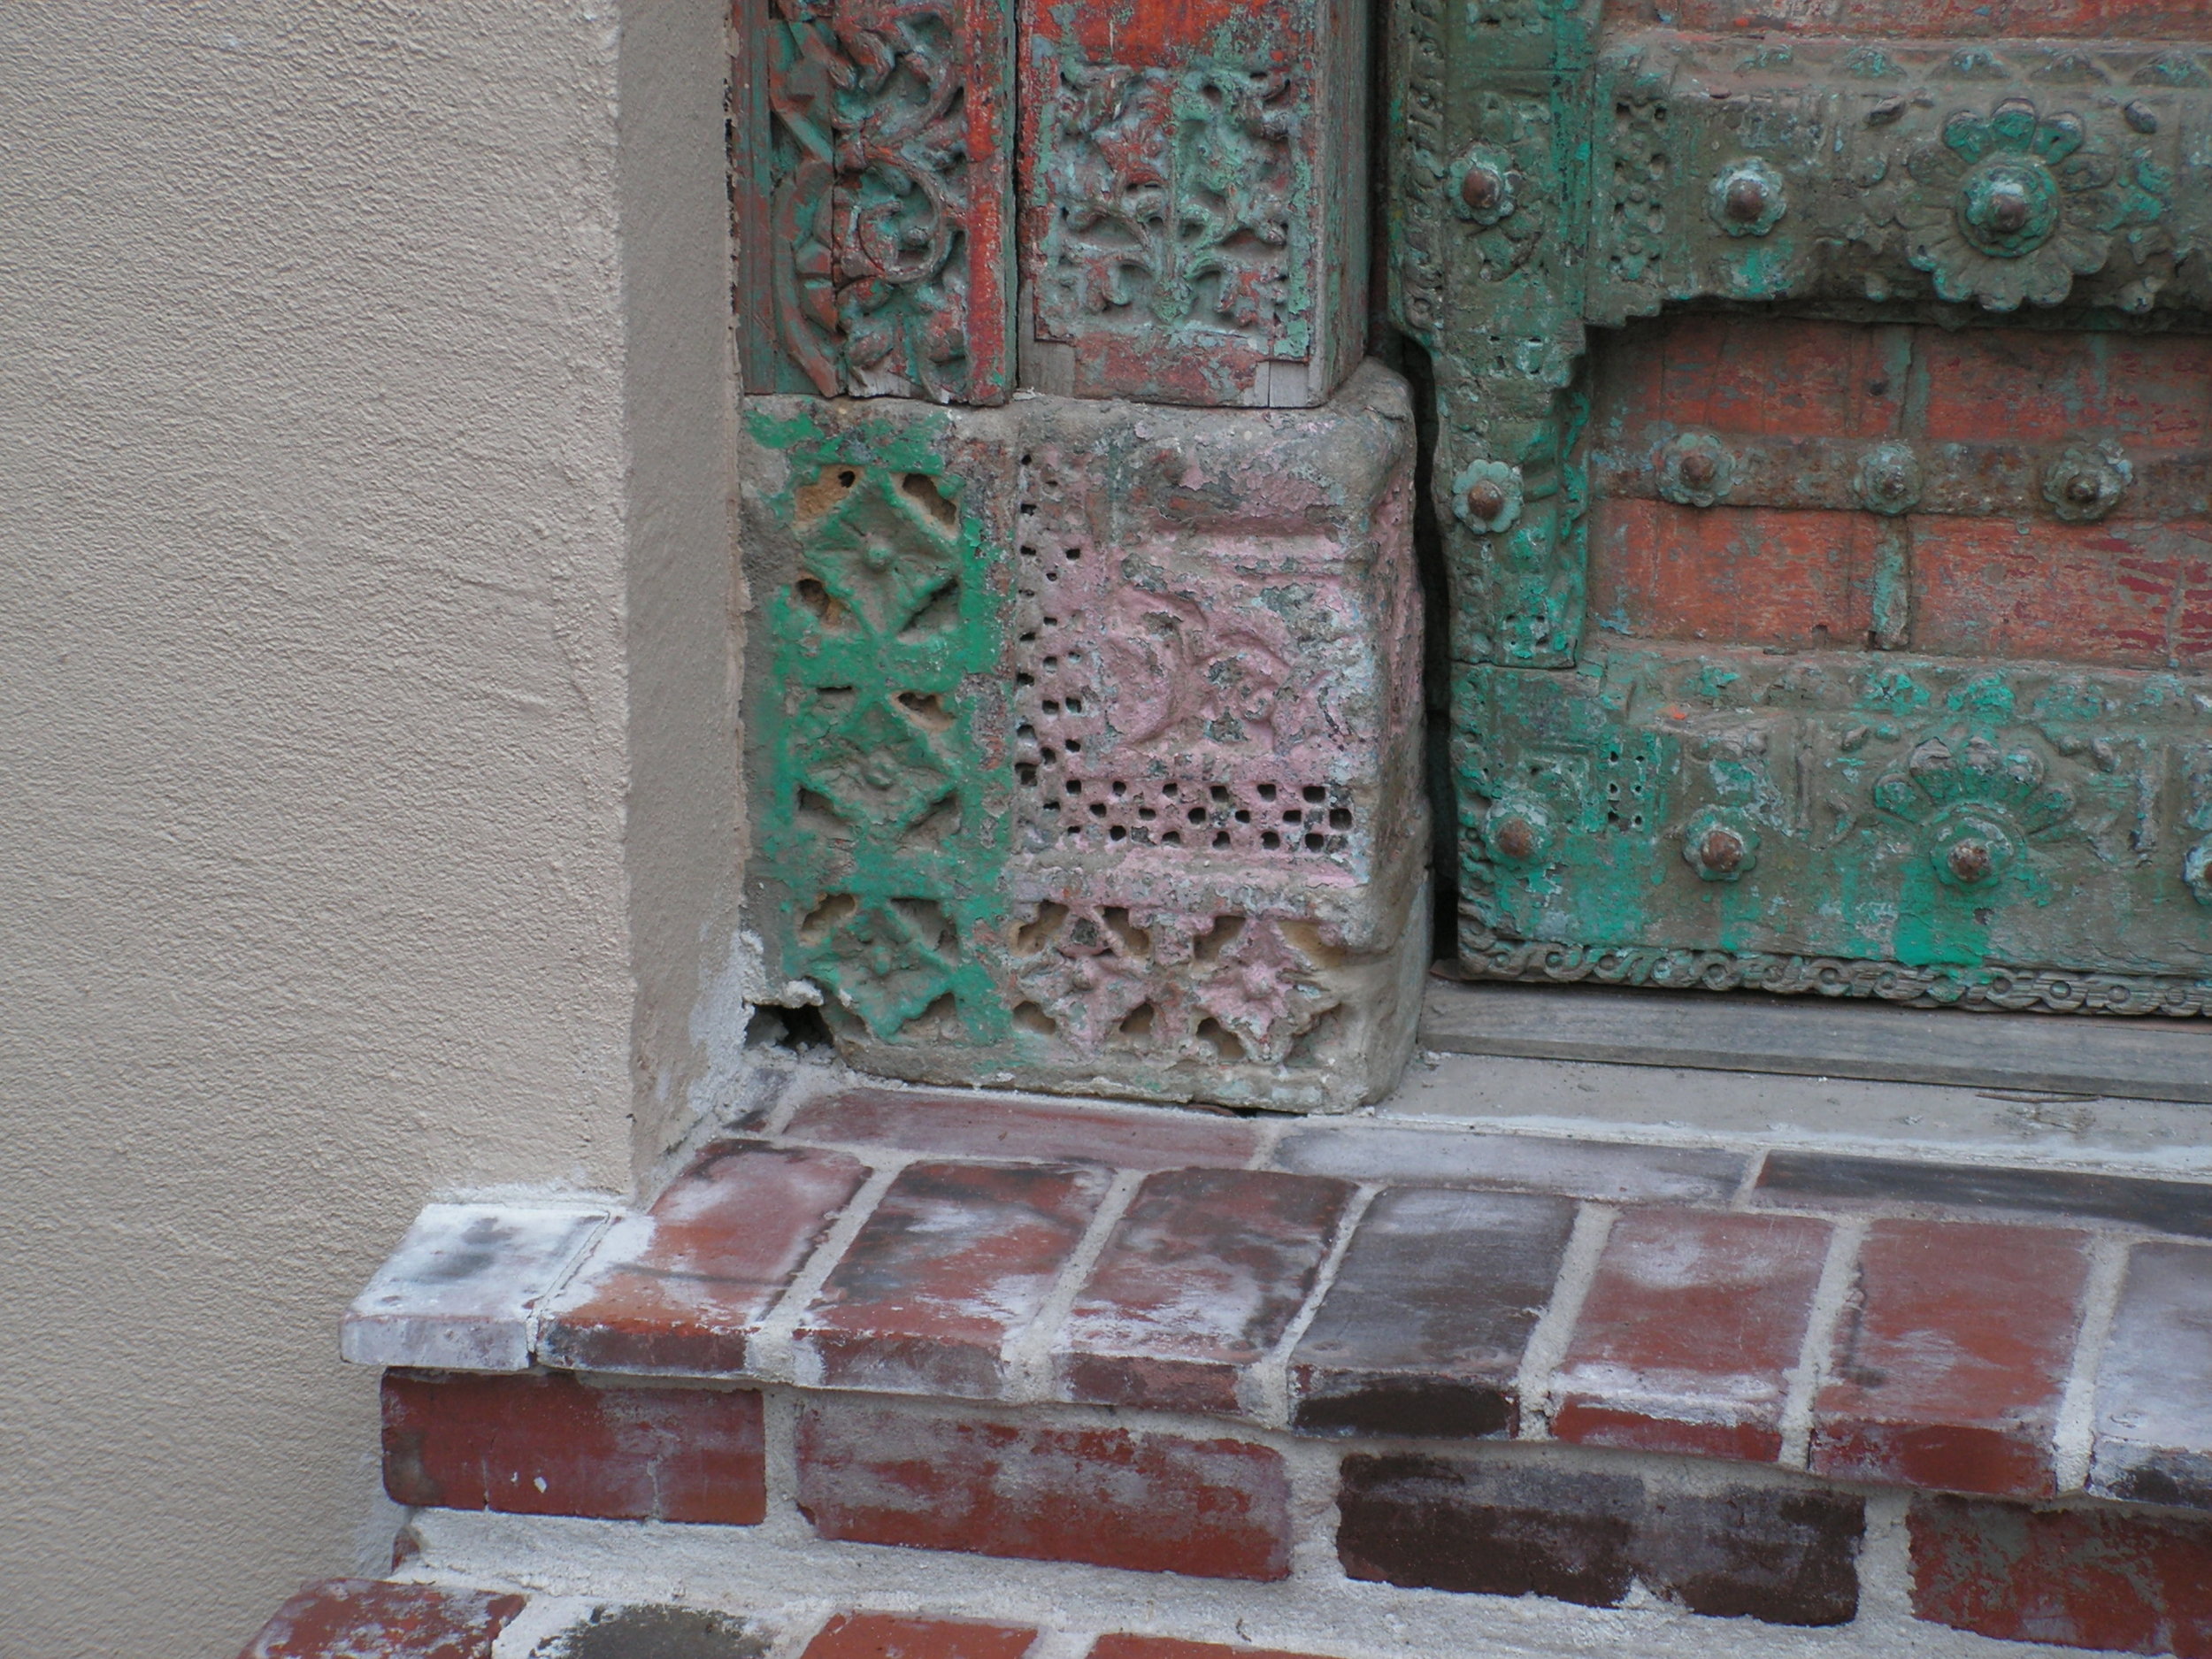 Guesthouse New Orleans - entry detail